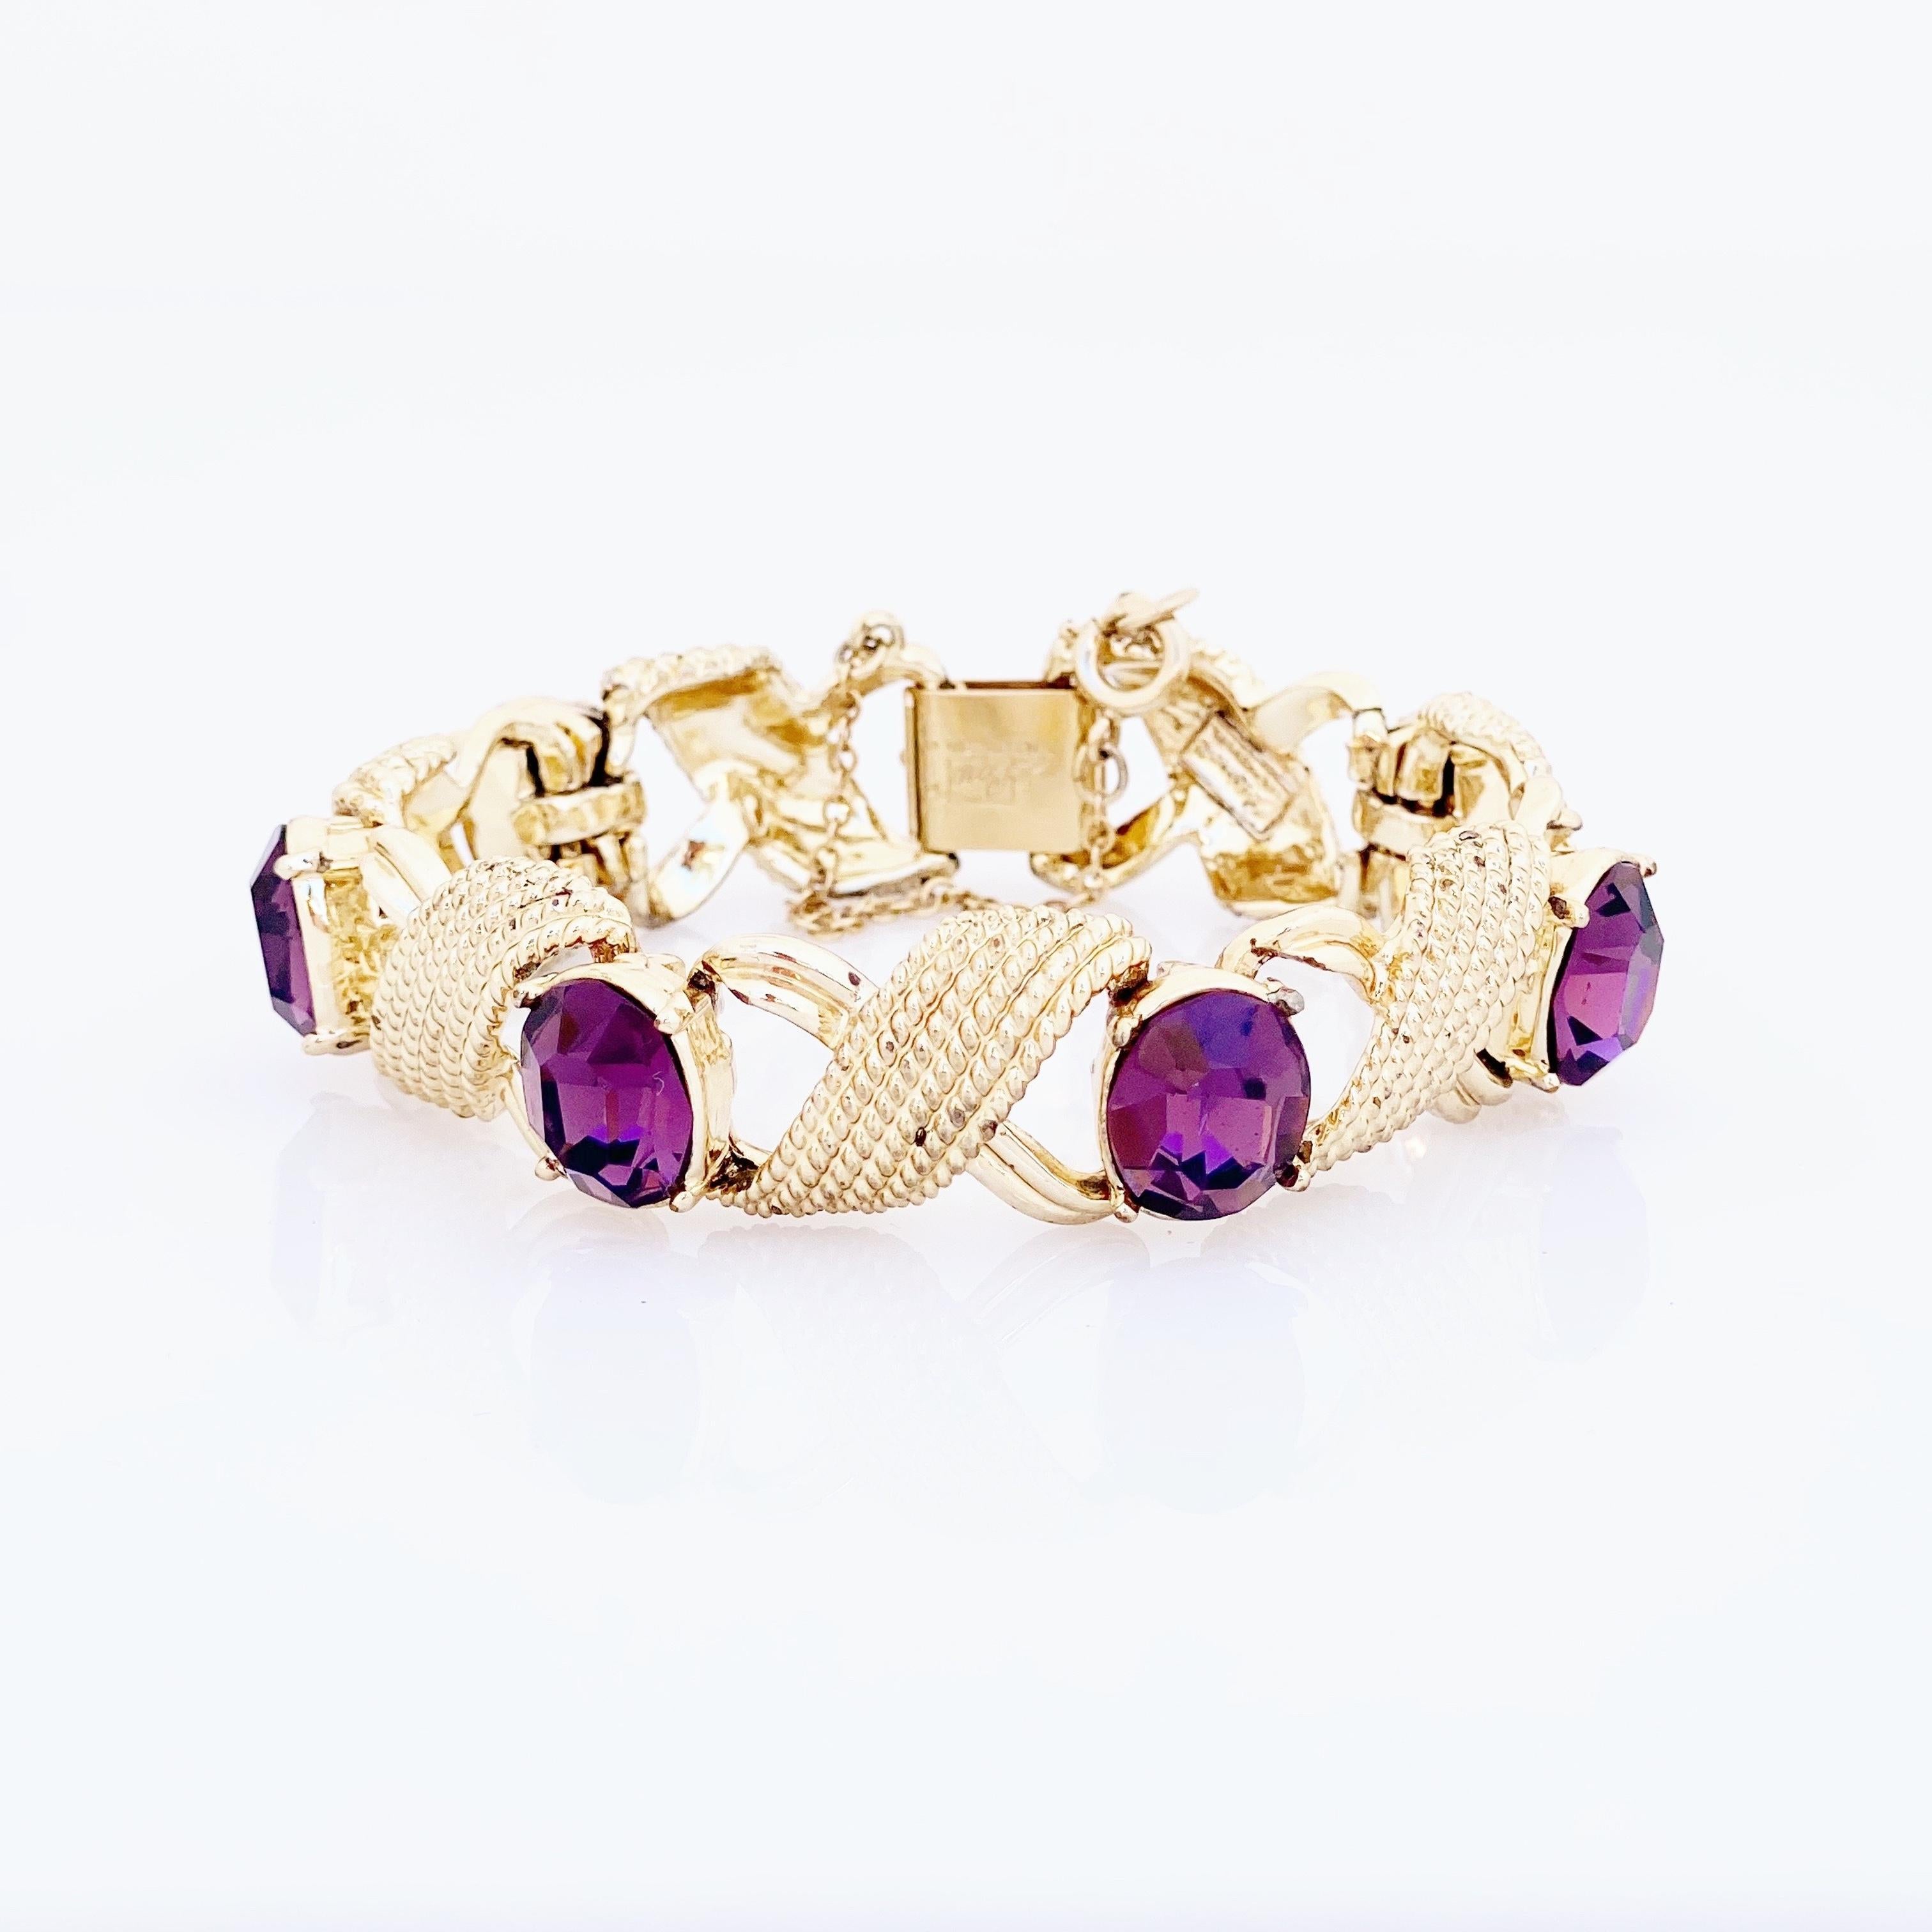 Modern Gold Bracelet With Purple Crystals By Corocraft, 1950s